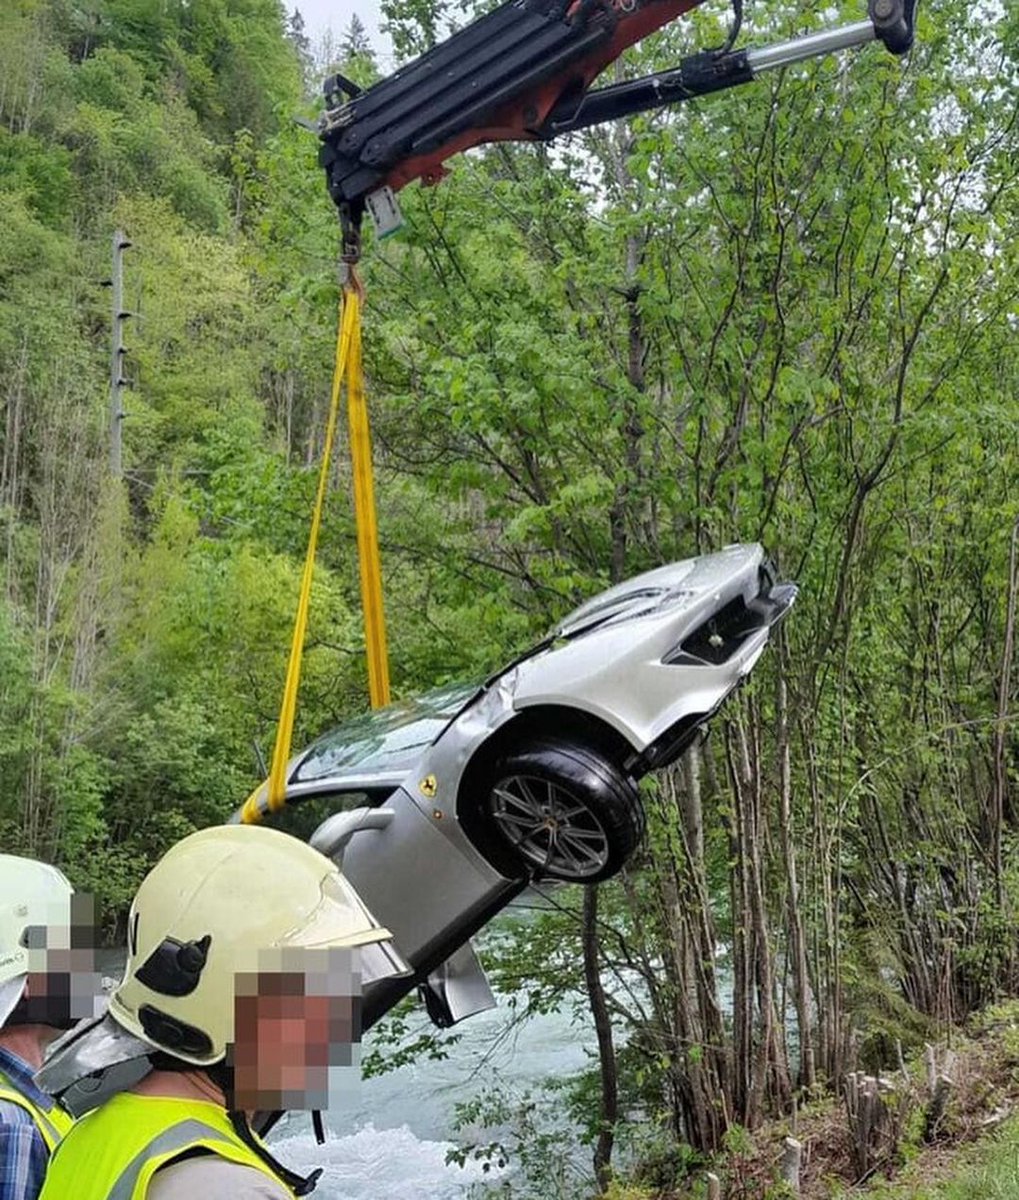 You can't park there mate 😉 A man crashed his Ferrari 488 Pista and ended up a in a river in Berna, Switzerland recently. He had to wait approximately 40 mins until he was rescued.